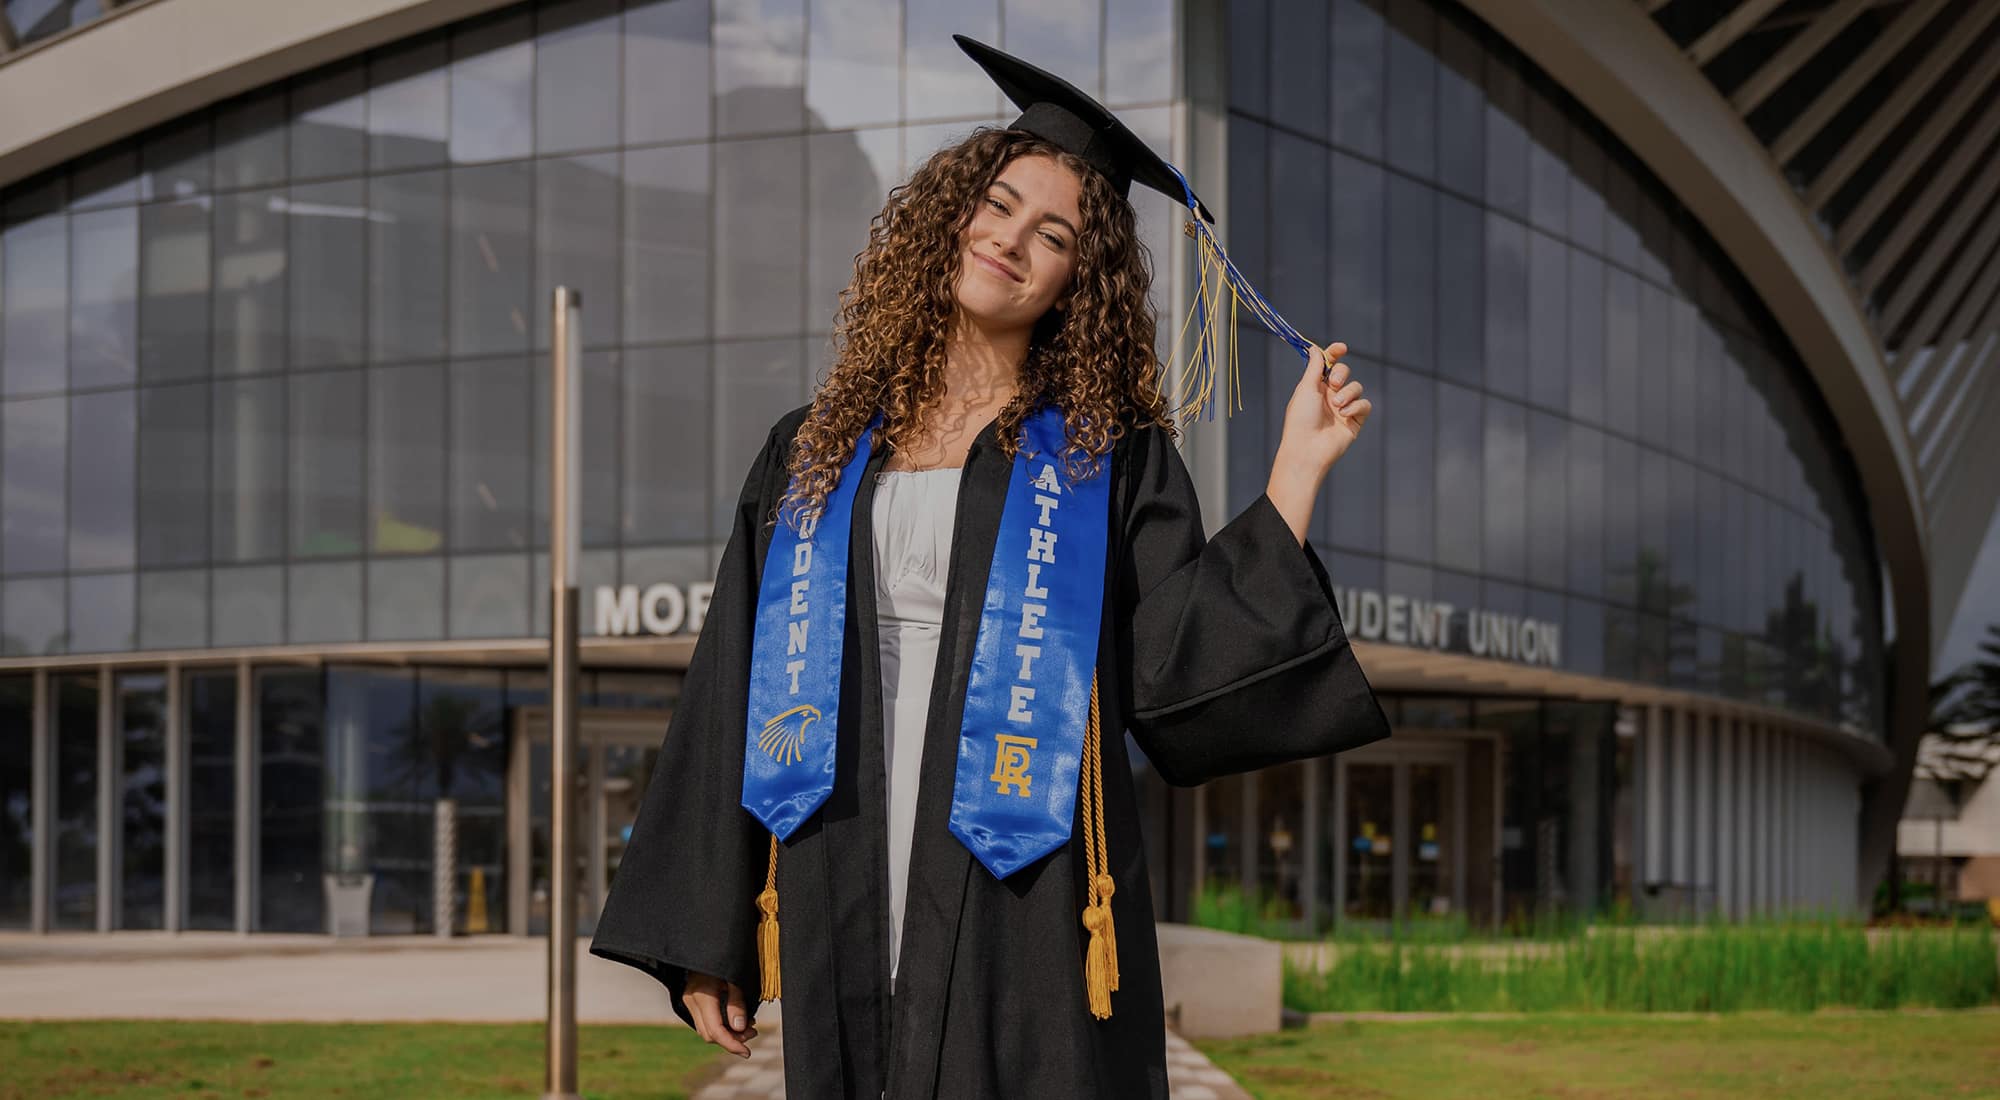 Julia, a white woman with long curly hair, poses with her head tilted, and holding the tassel on her graduation cap with her fingers. She also wears a grad gown, a light blue dress, yellow cords, and a blue sash that reads Student Athlete.